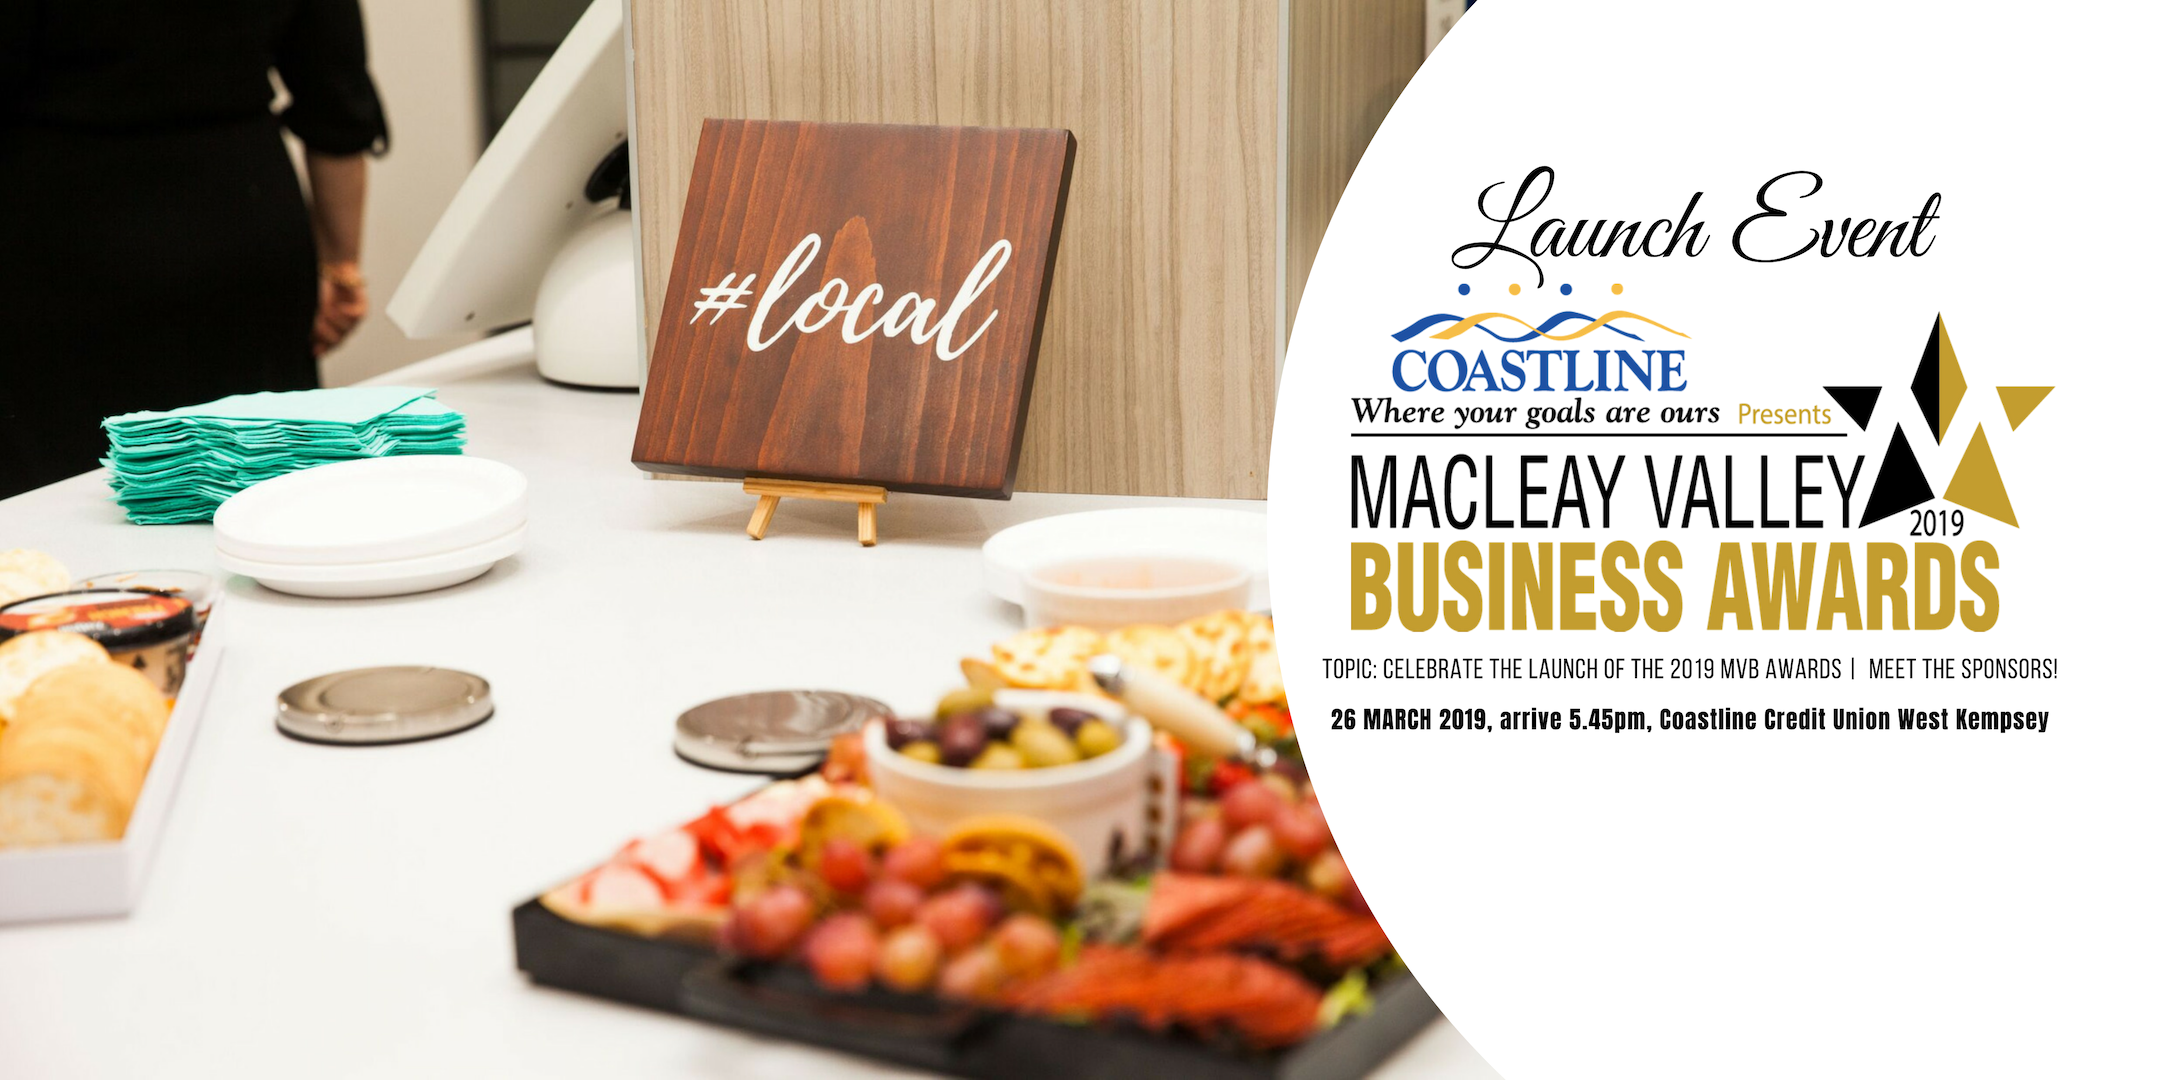 2019 Macleay Valley Business Awards Launch Event